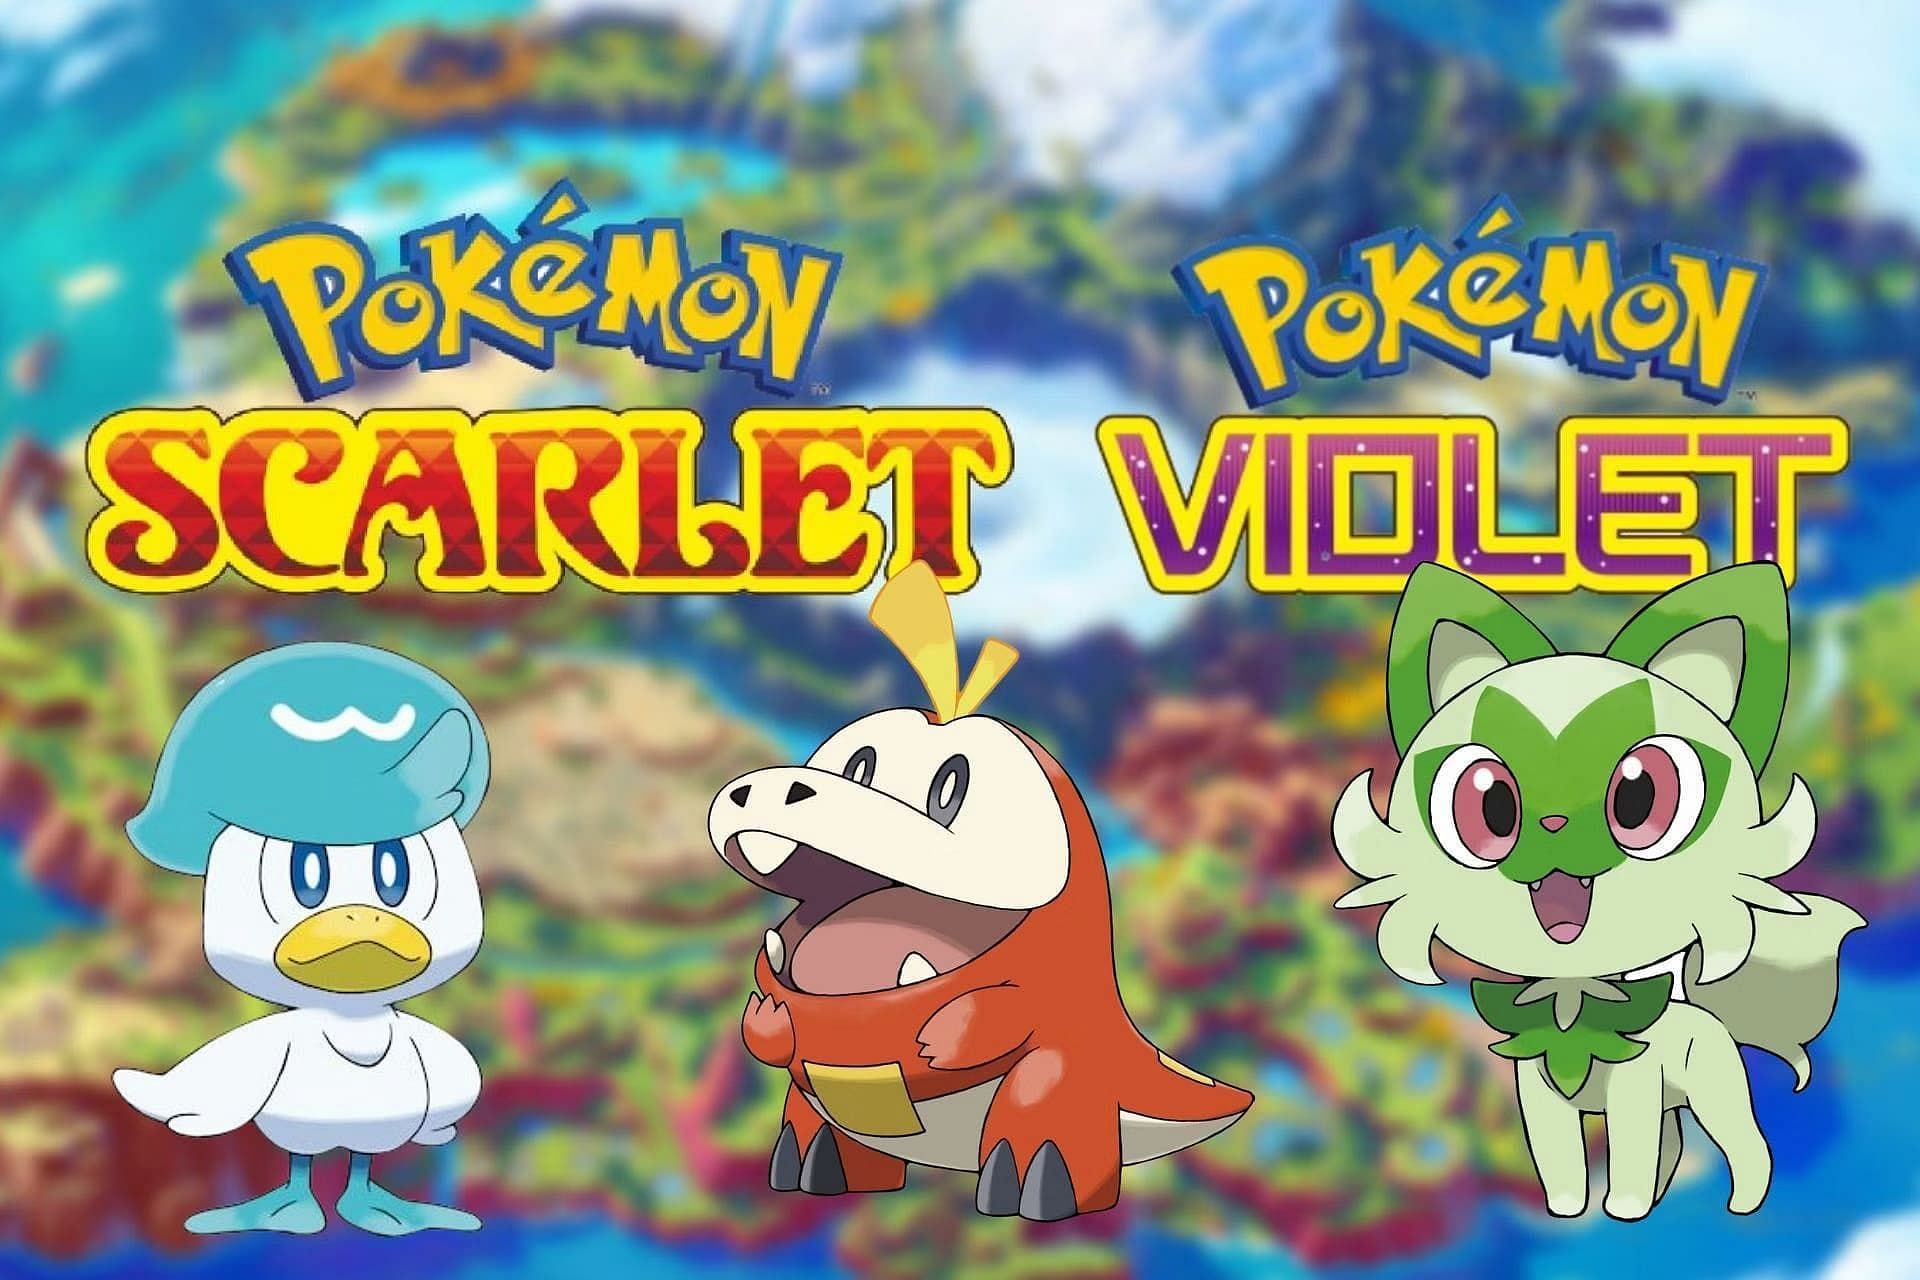 What are the Gen 9 Starters based on in Pokemon Scarlet and Violet